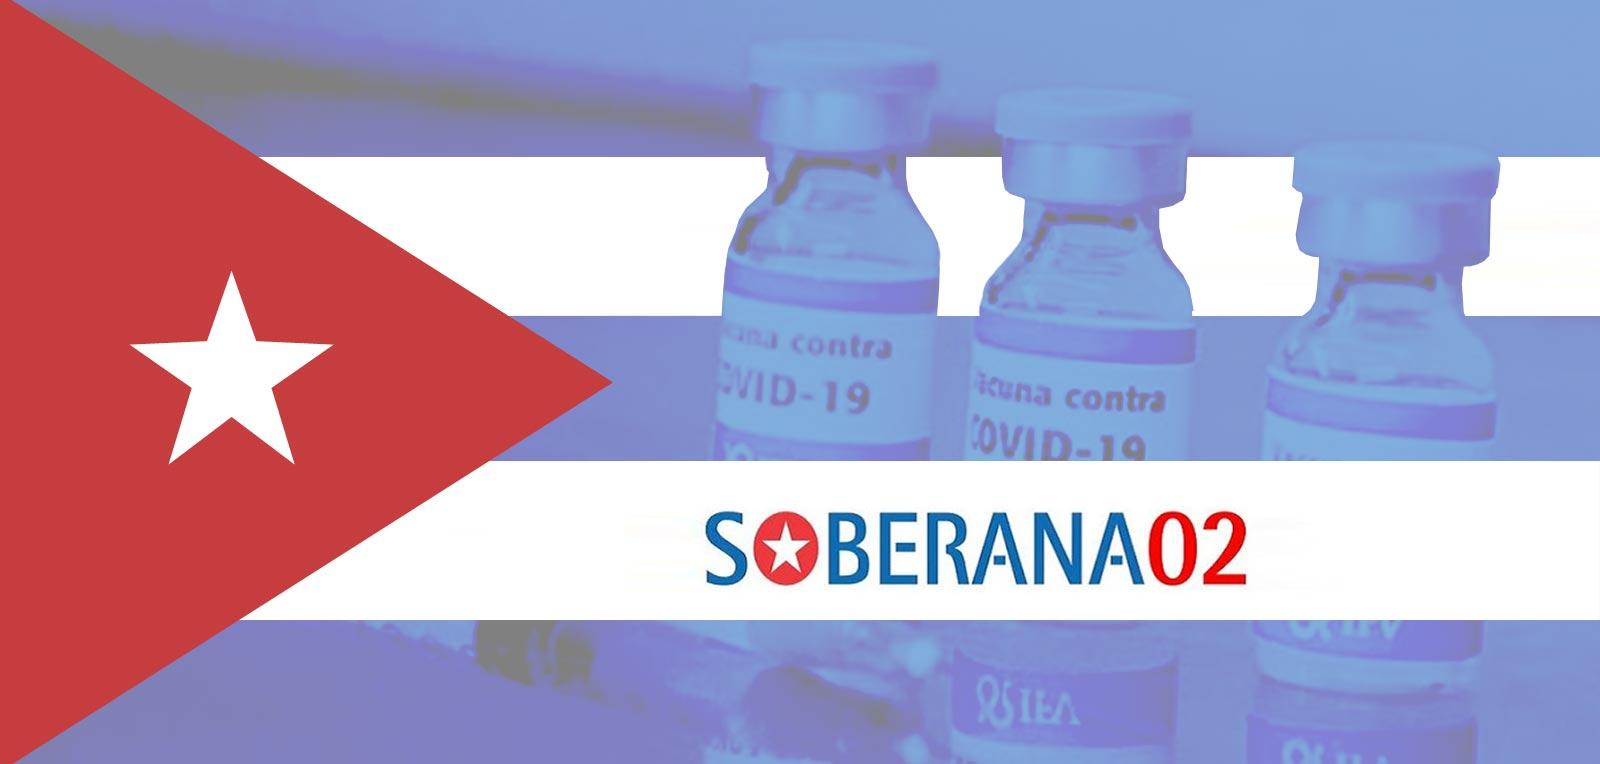 Countries such as India, Vietnam, Iran, Venezuela and Pakistan have also expressed interest in acquiring the Soberana 02 vaccine.